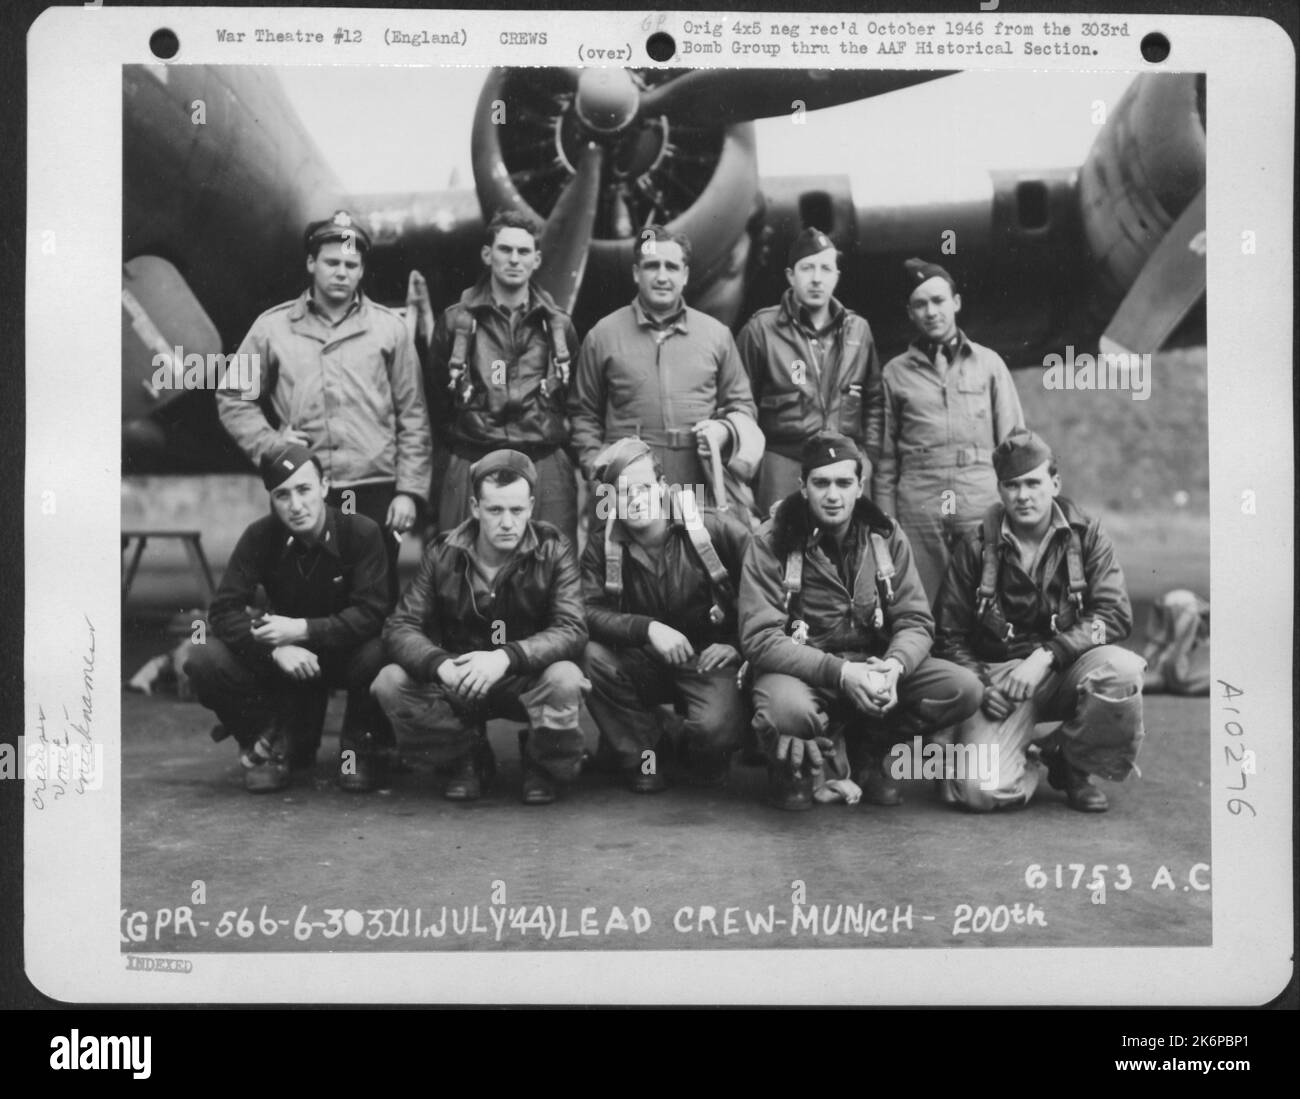 Lead Crew On Bombing Mission To Munich, Germany, Beside A Boeing B-17, 'Flying Fortress' 'Hell's Angels' After Completion Of Its 200Th Mission. 303Rd Bomb Group. England, 11 July 1944. Stock Photo